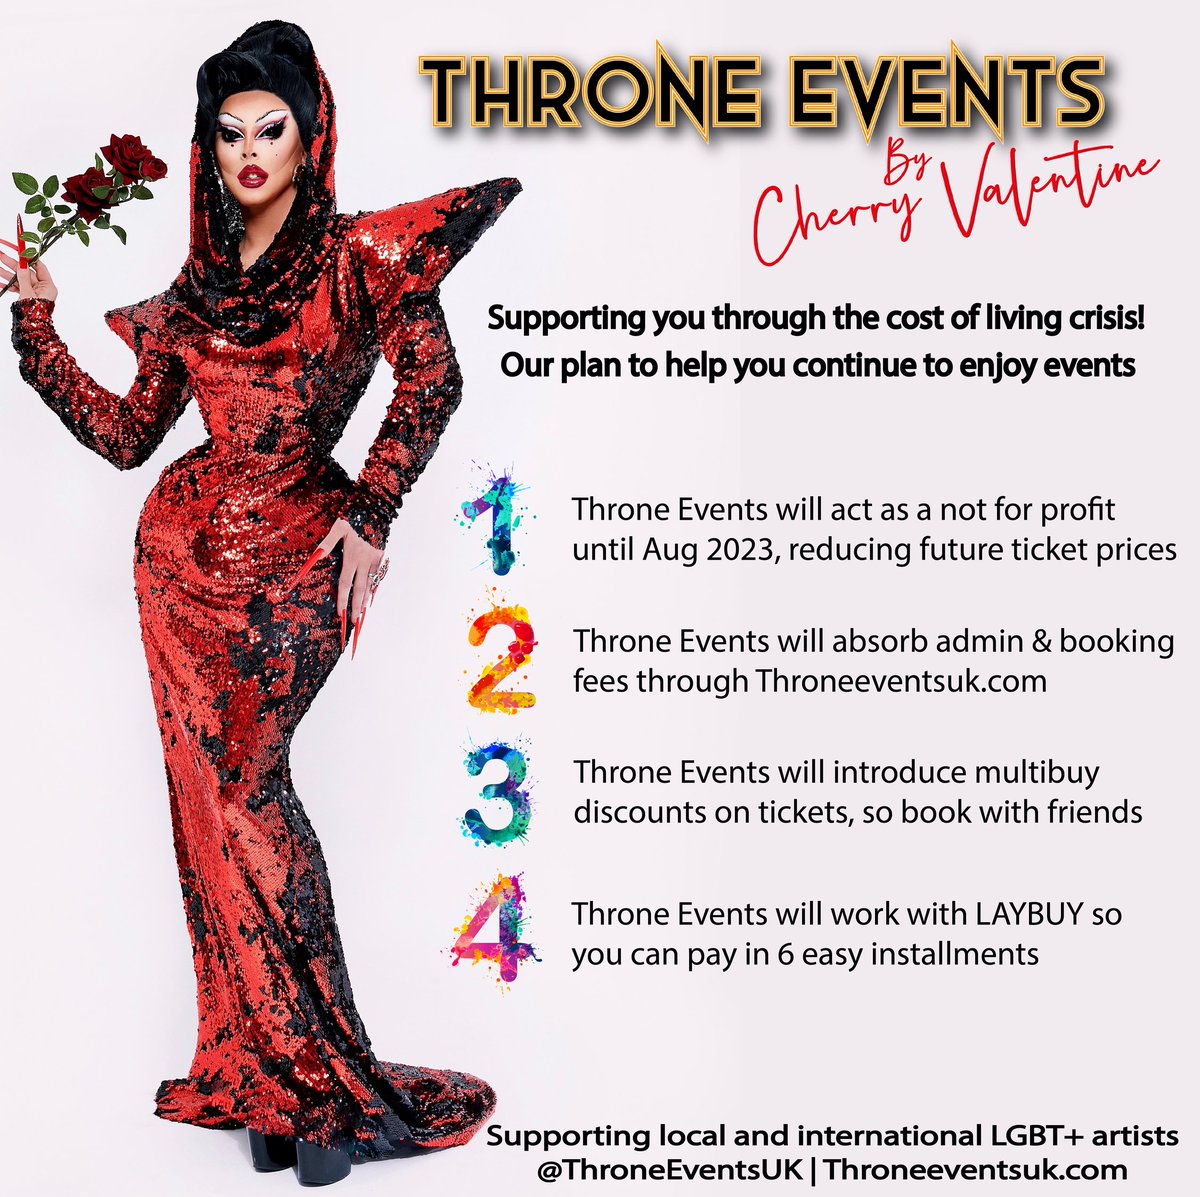 ANNOUNCEMENT!

View our full statement on our insta page @ throneeventsuk

Supporting local and international LGBTQ+ Artists and the wonderful Drag fans!

#supportlocaldrag